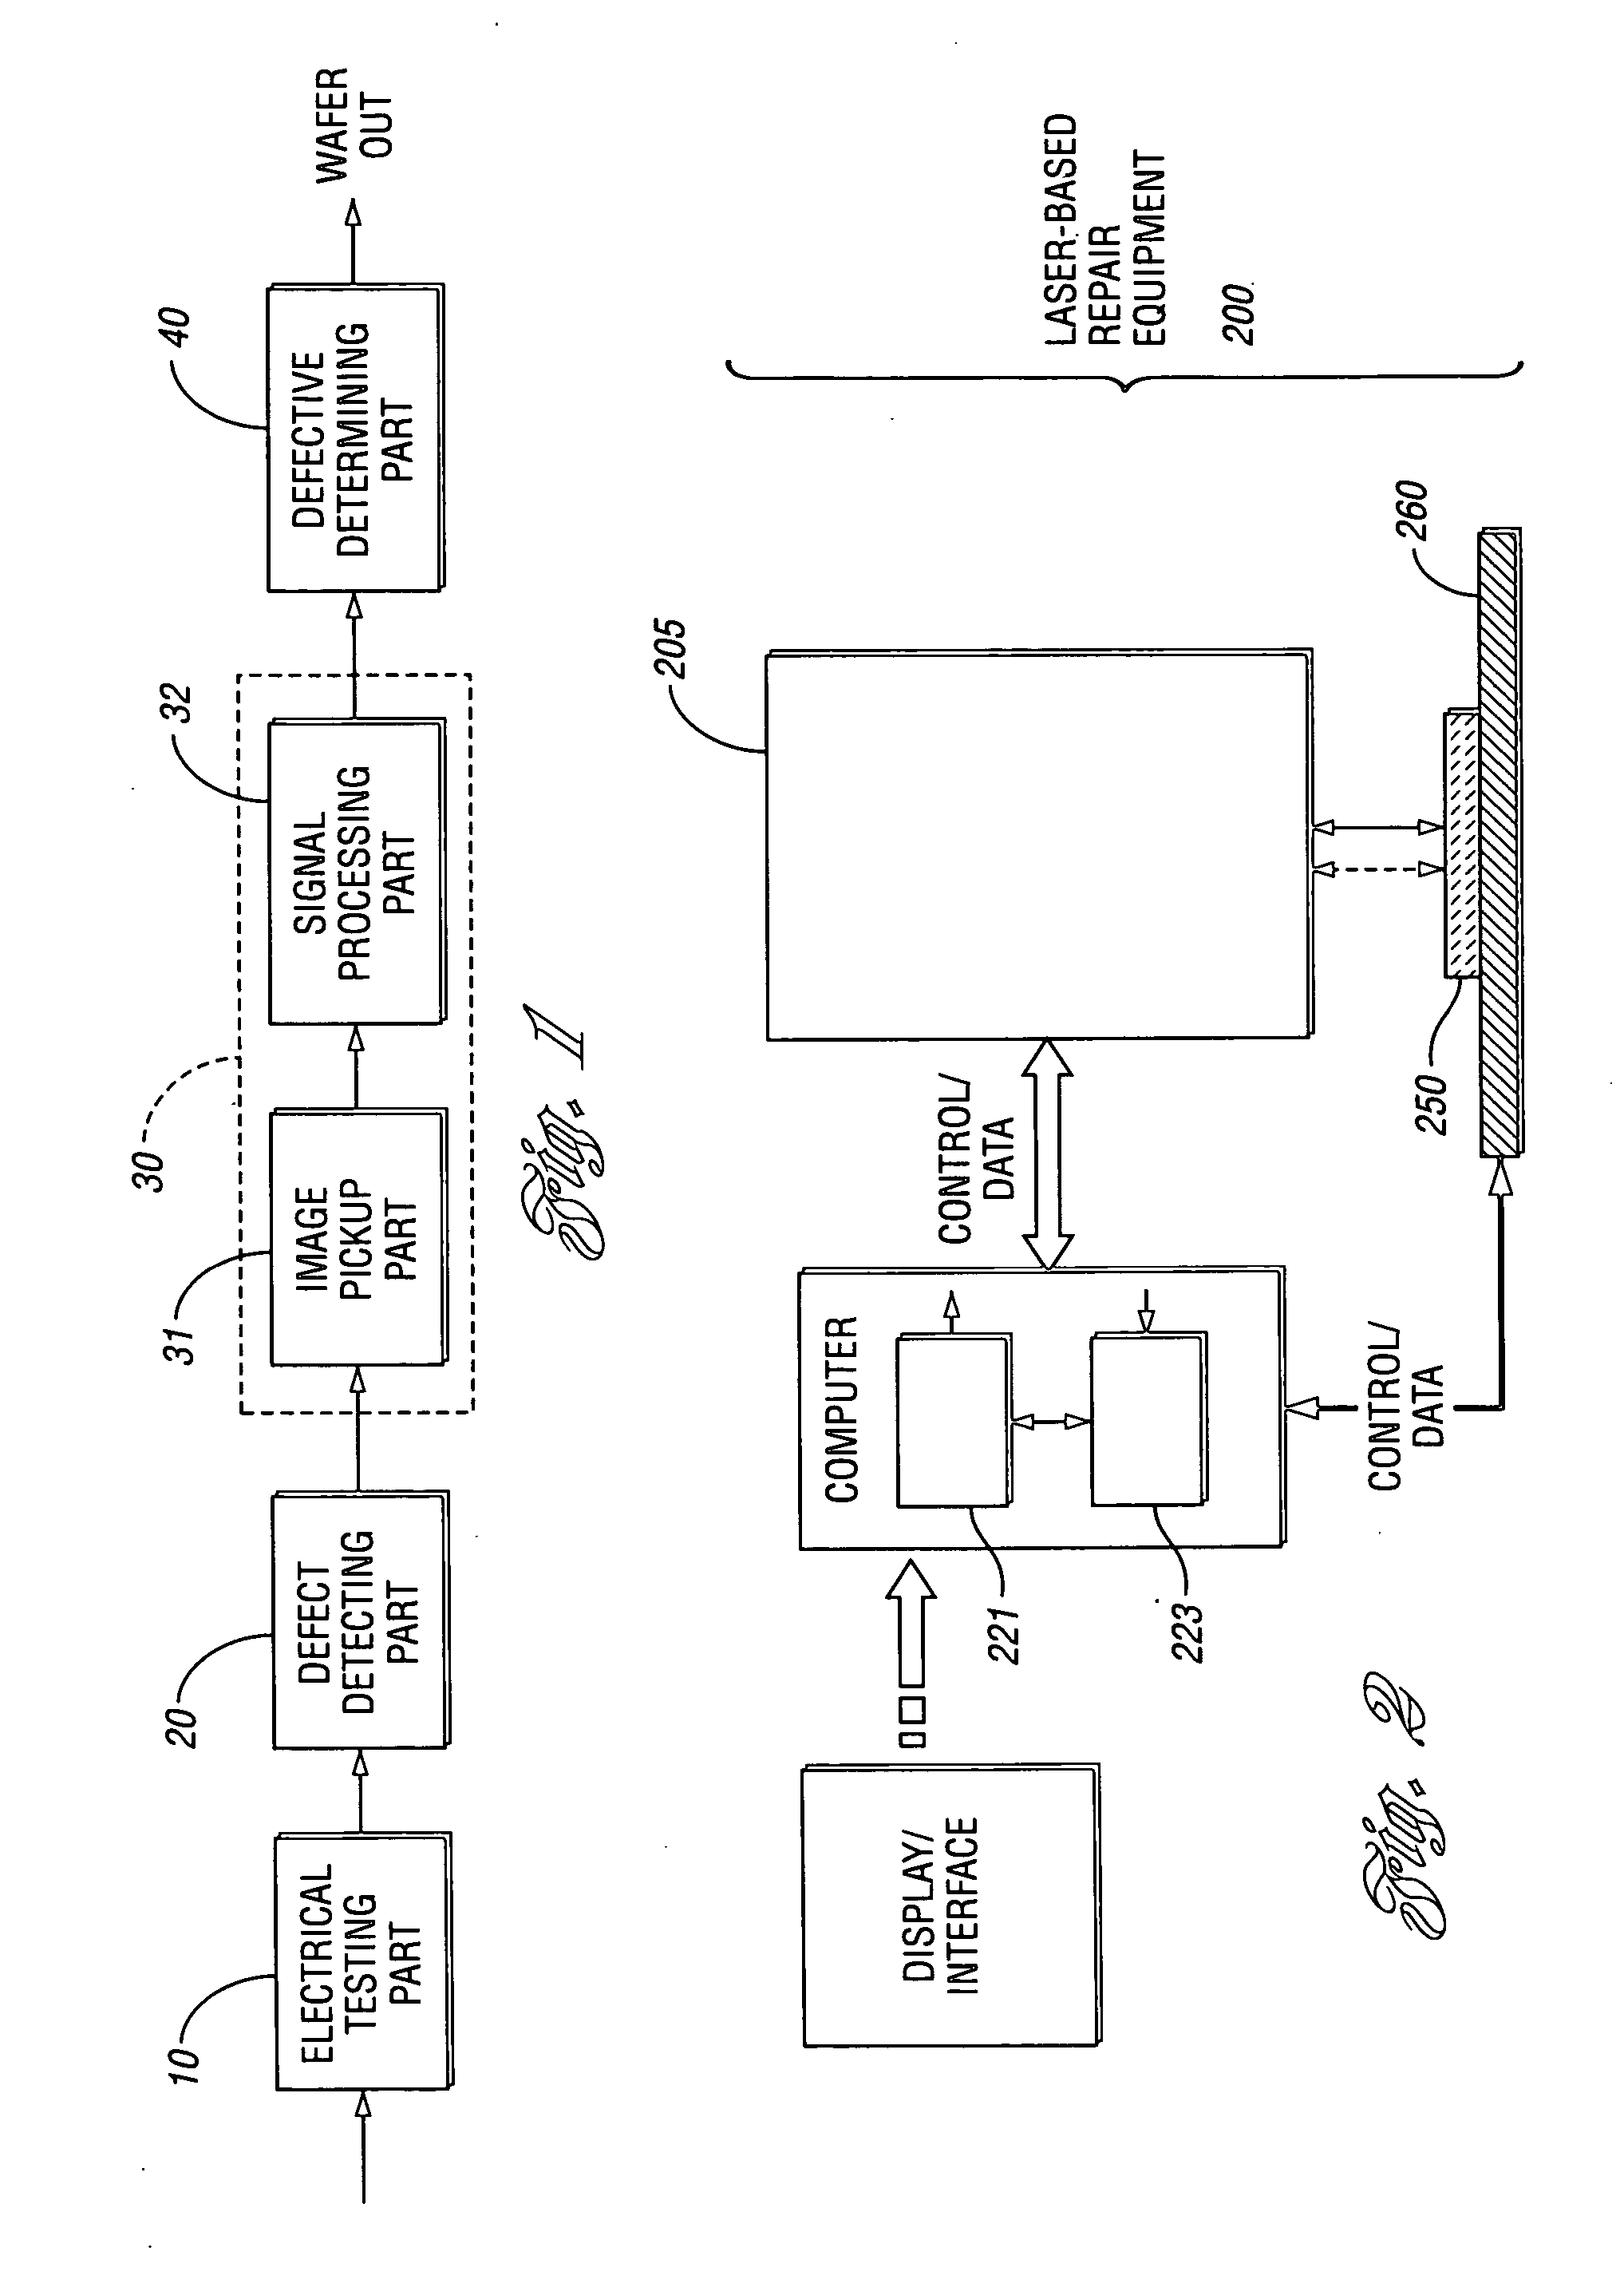 Method and system for adaptively controlling a laser-based material processing process and method and system for qualifying same